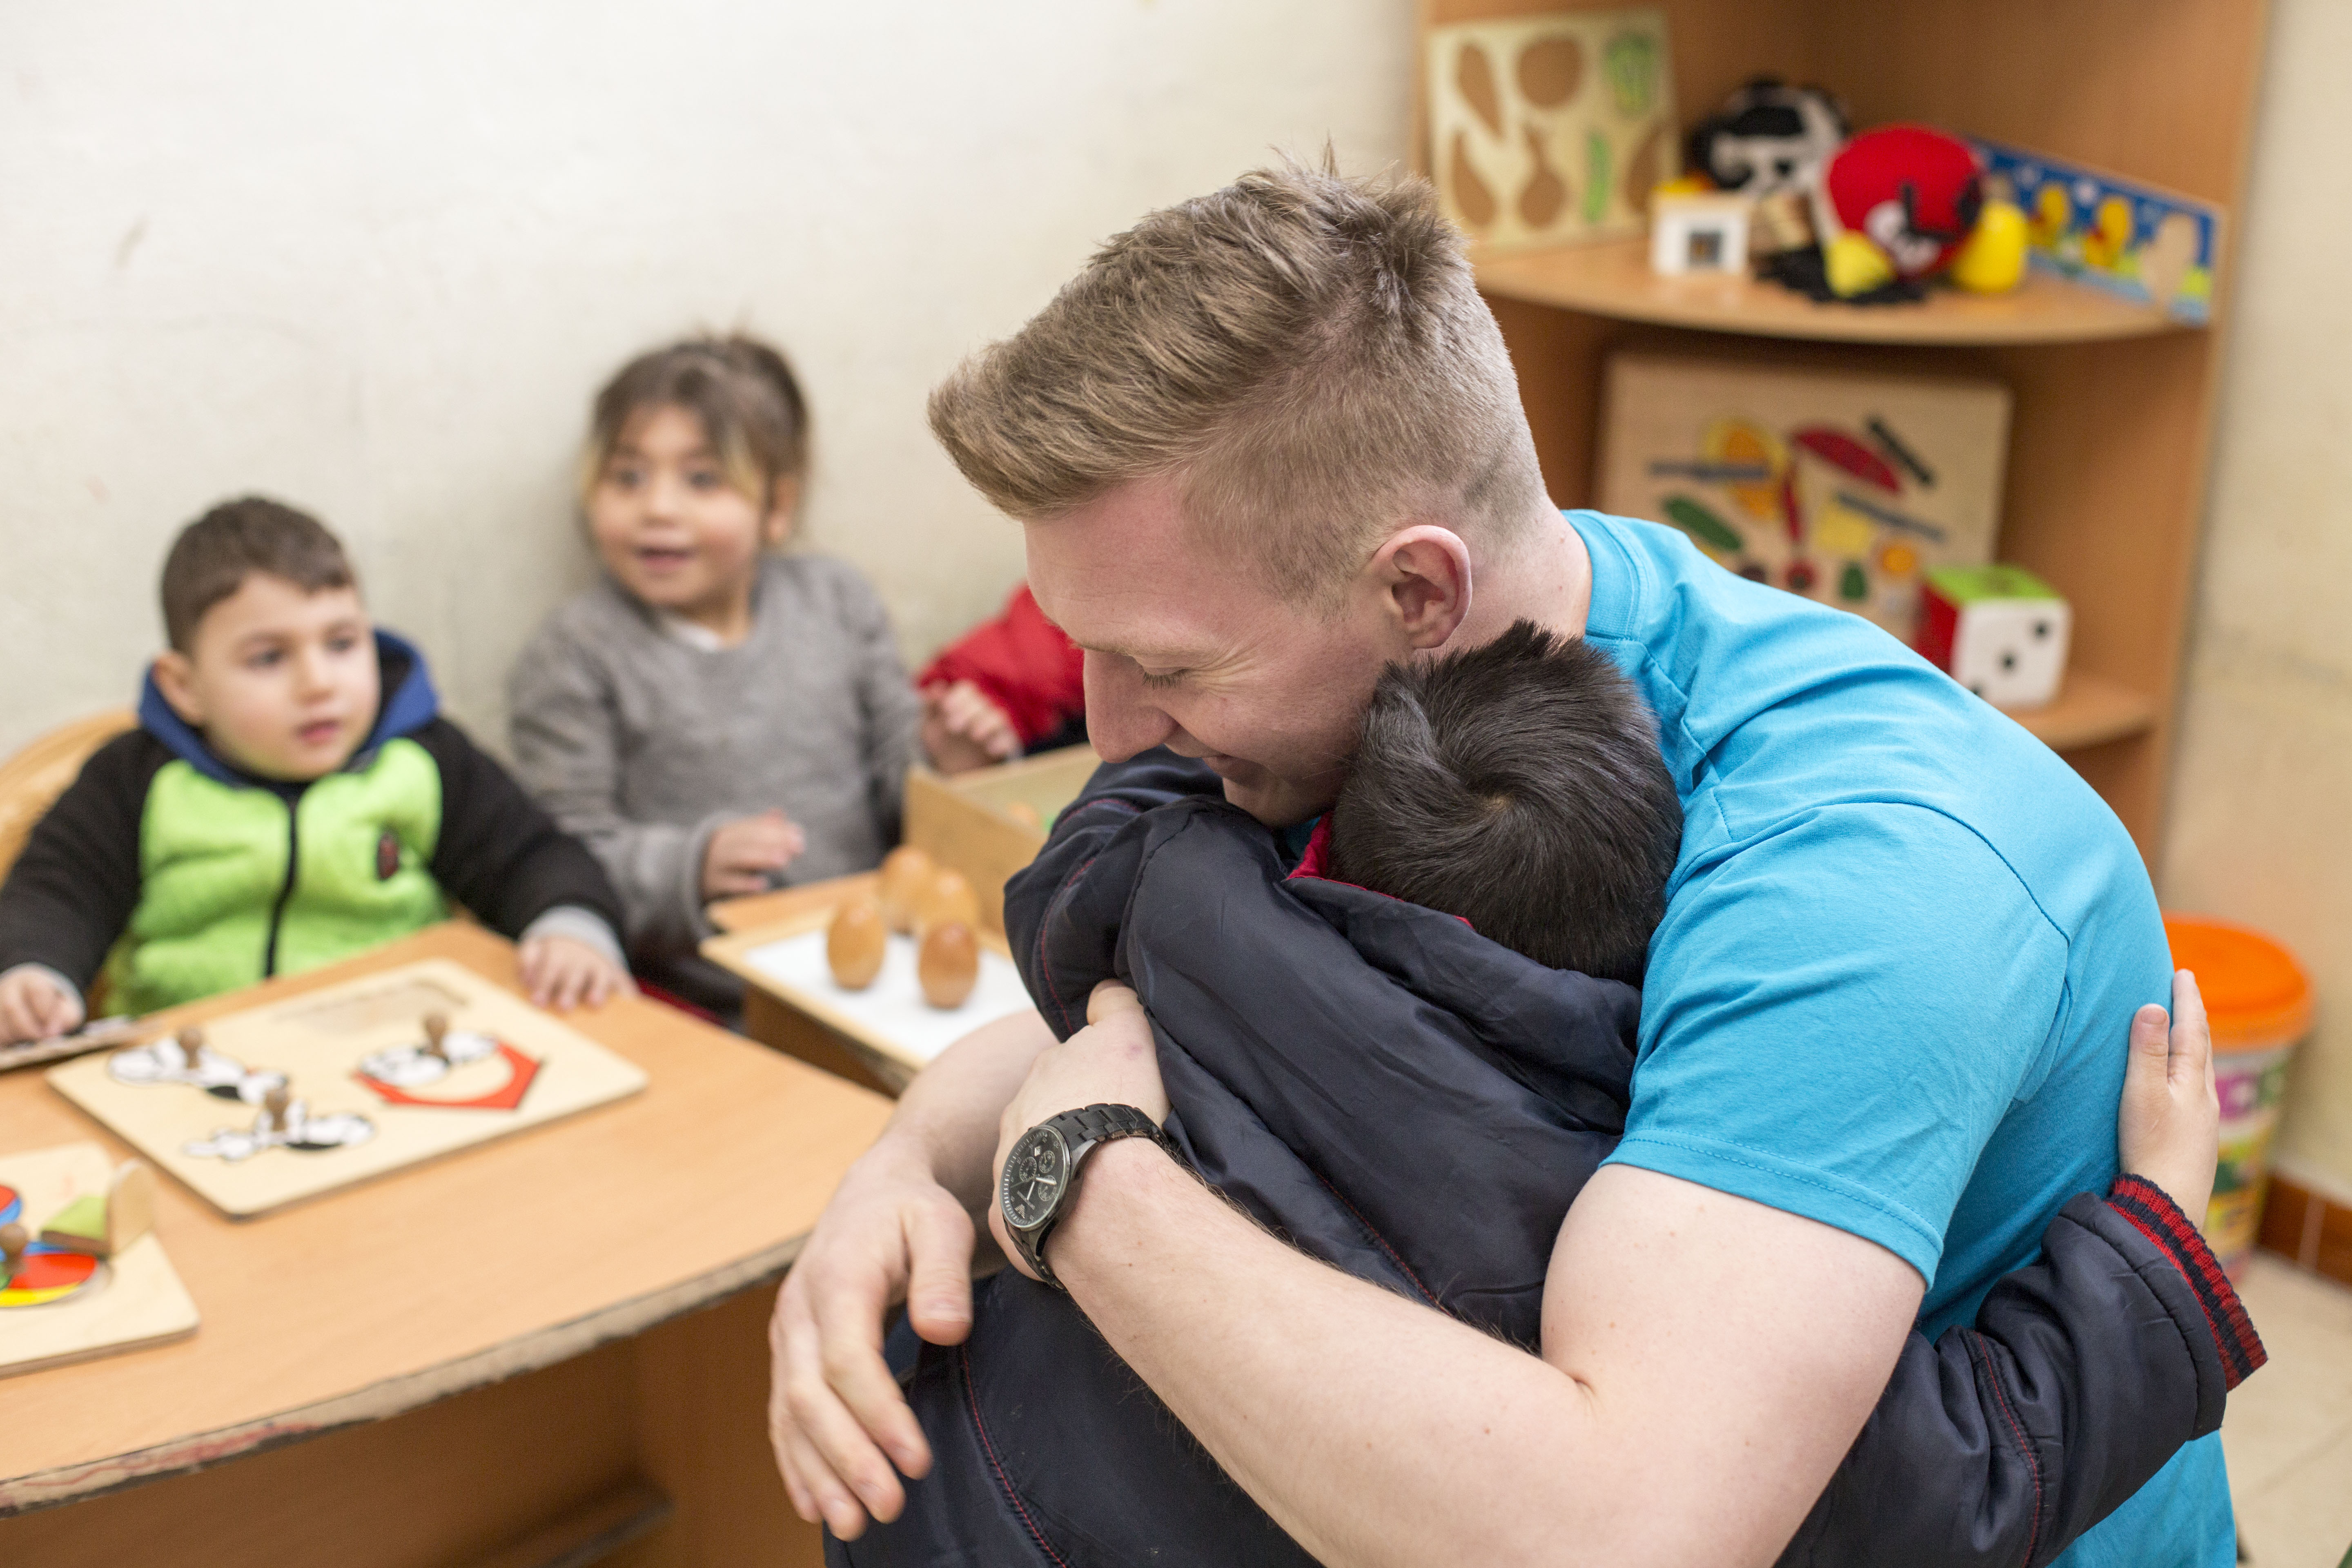 A man hugs a child in a playroom